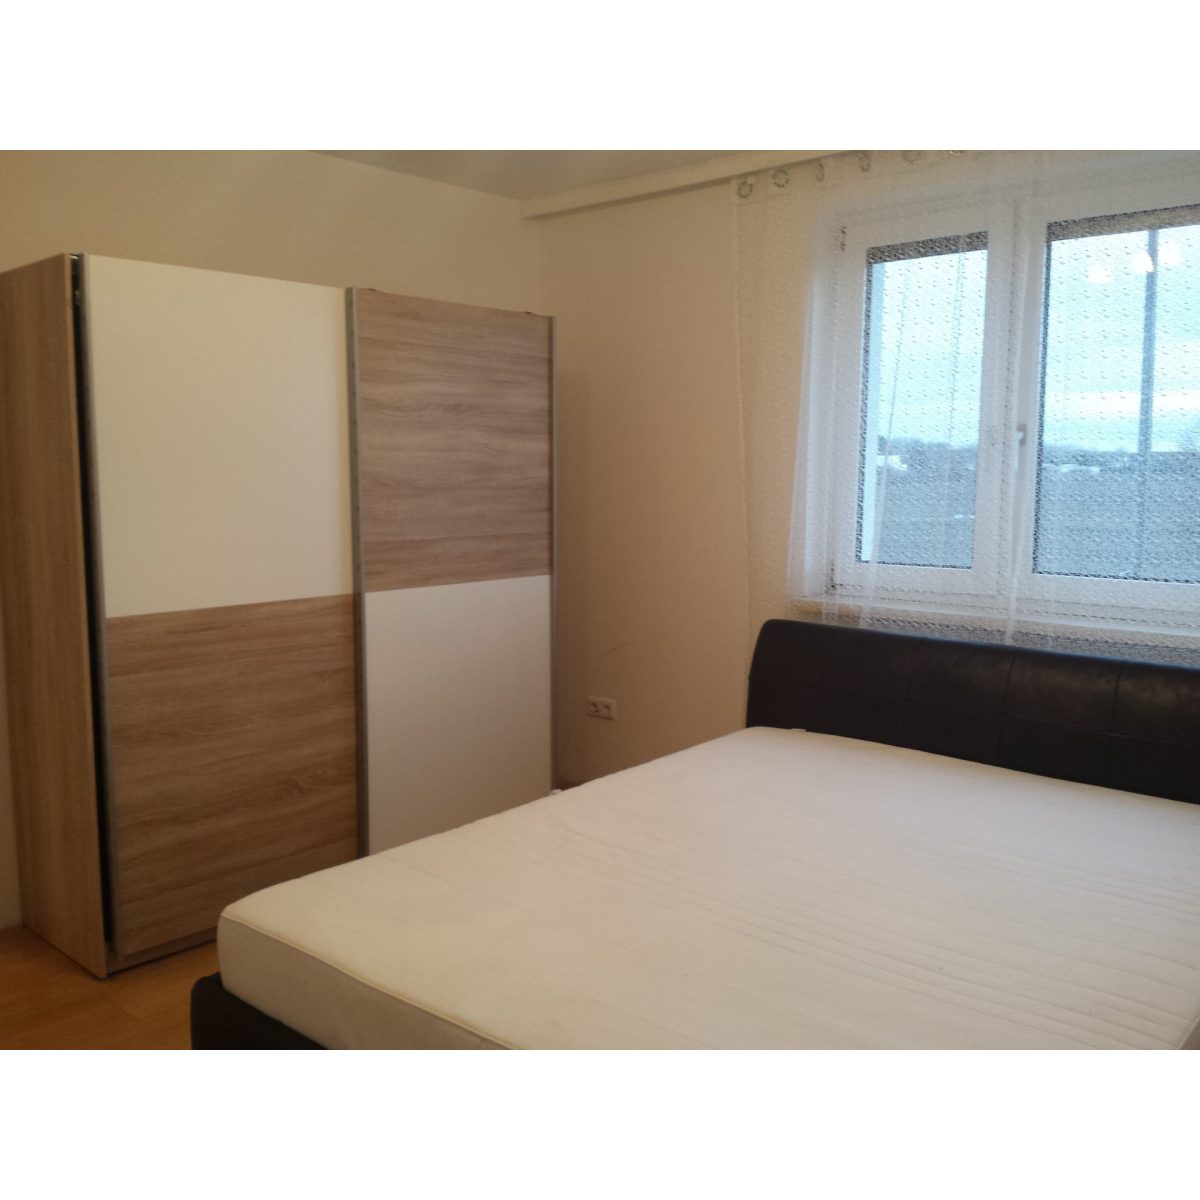 Dazzling 2 bedroom apartment in Zagreb for rent (Students only) | Zagreb apartment for rent 4